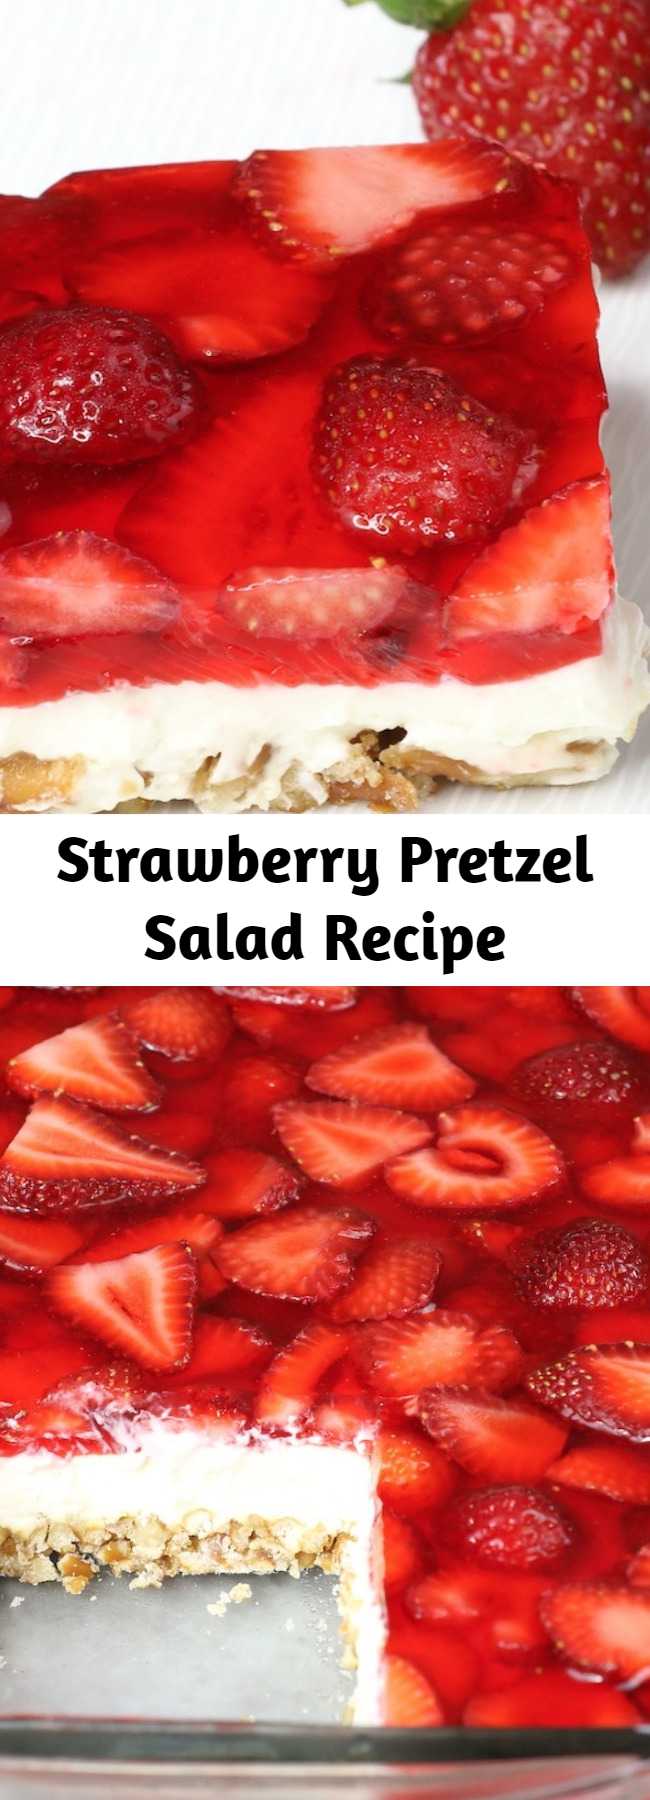 Strawberry Pretzel Salad Recipe - The delicious combination of the saltiness from its pretzel crust, sweetness from the creamy and smooth cream cheese, with the fresh flavor from the strawberry and jello top layer! So irresistible! #StrawberryPretzelSalad